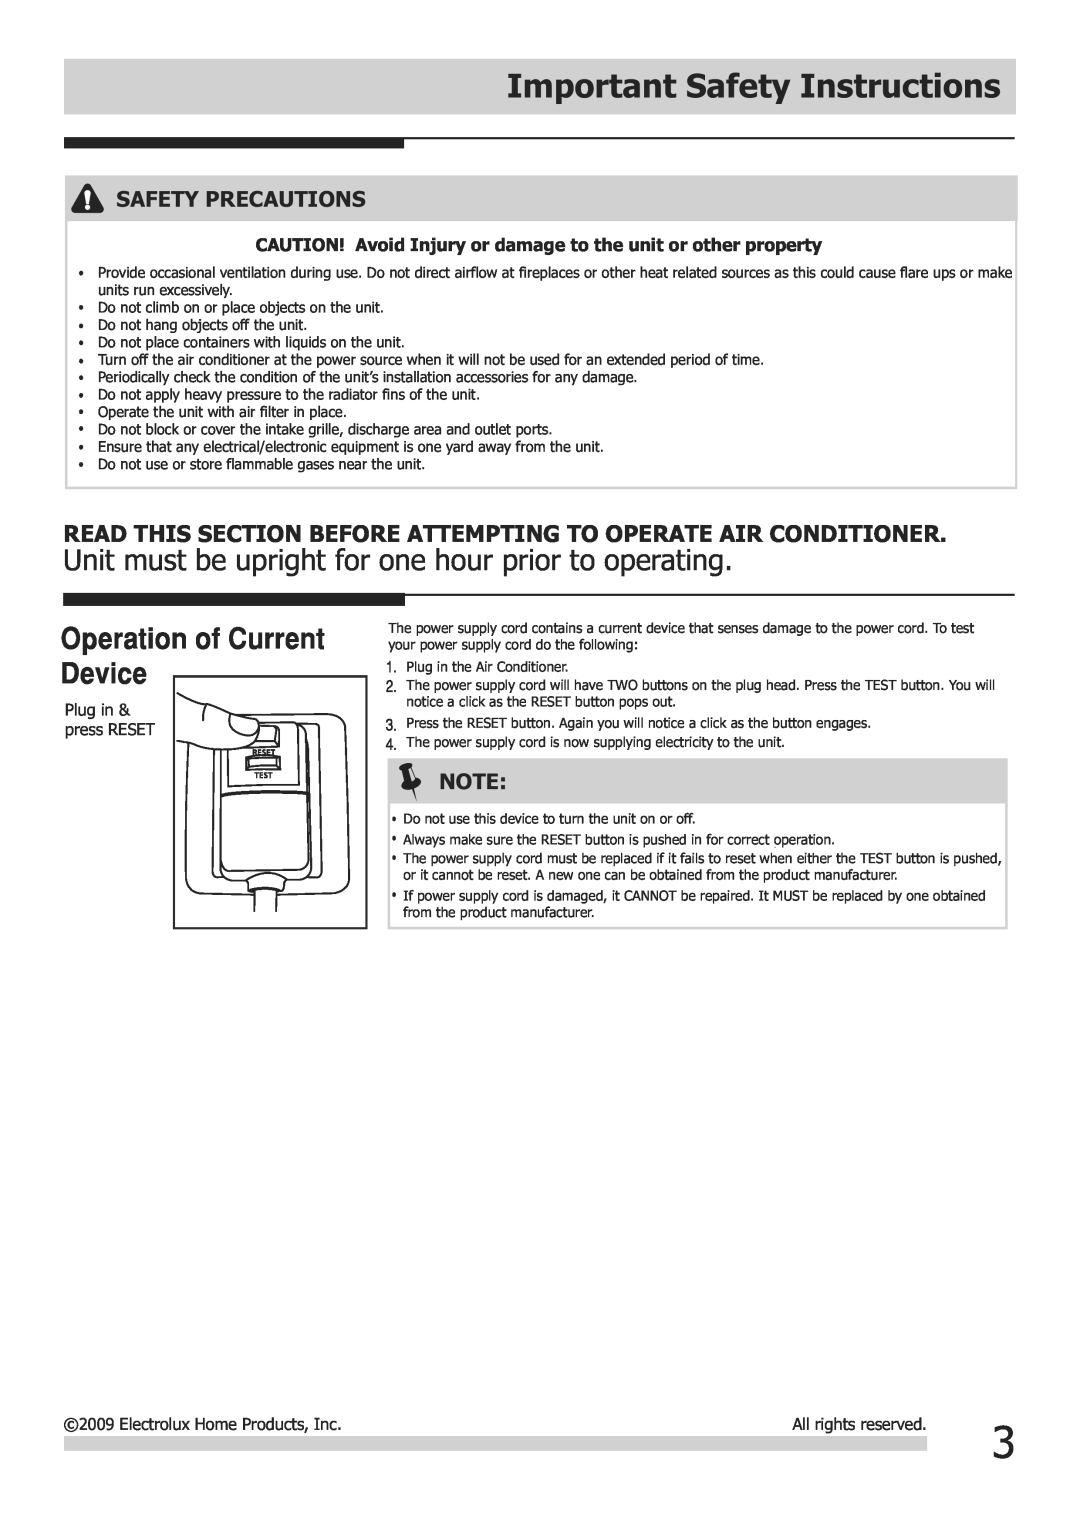 Frigidaire FGHD2472PF CAUTION! Avoid Injury or damage to the unit or other property, Important Safety Instructions 